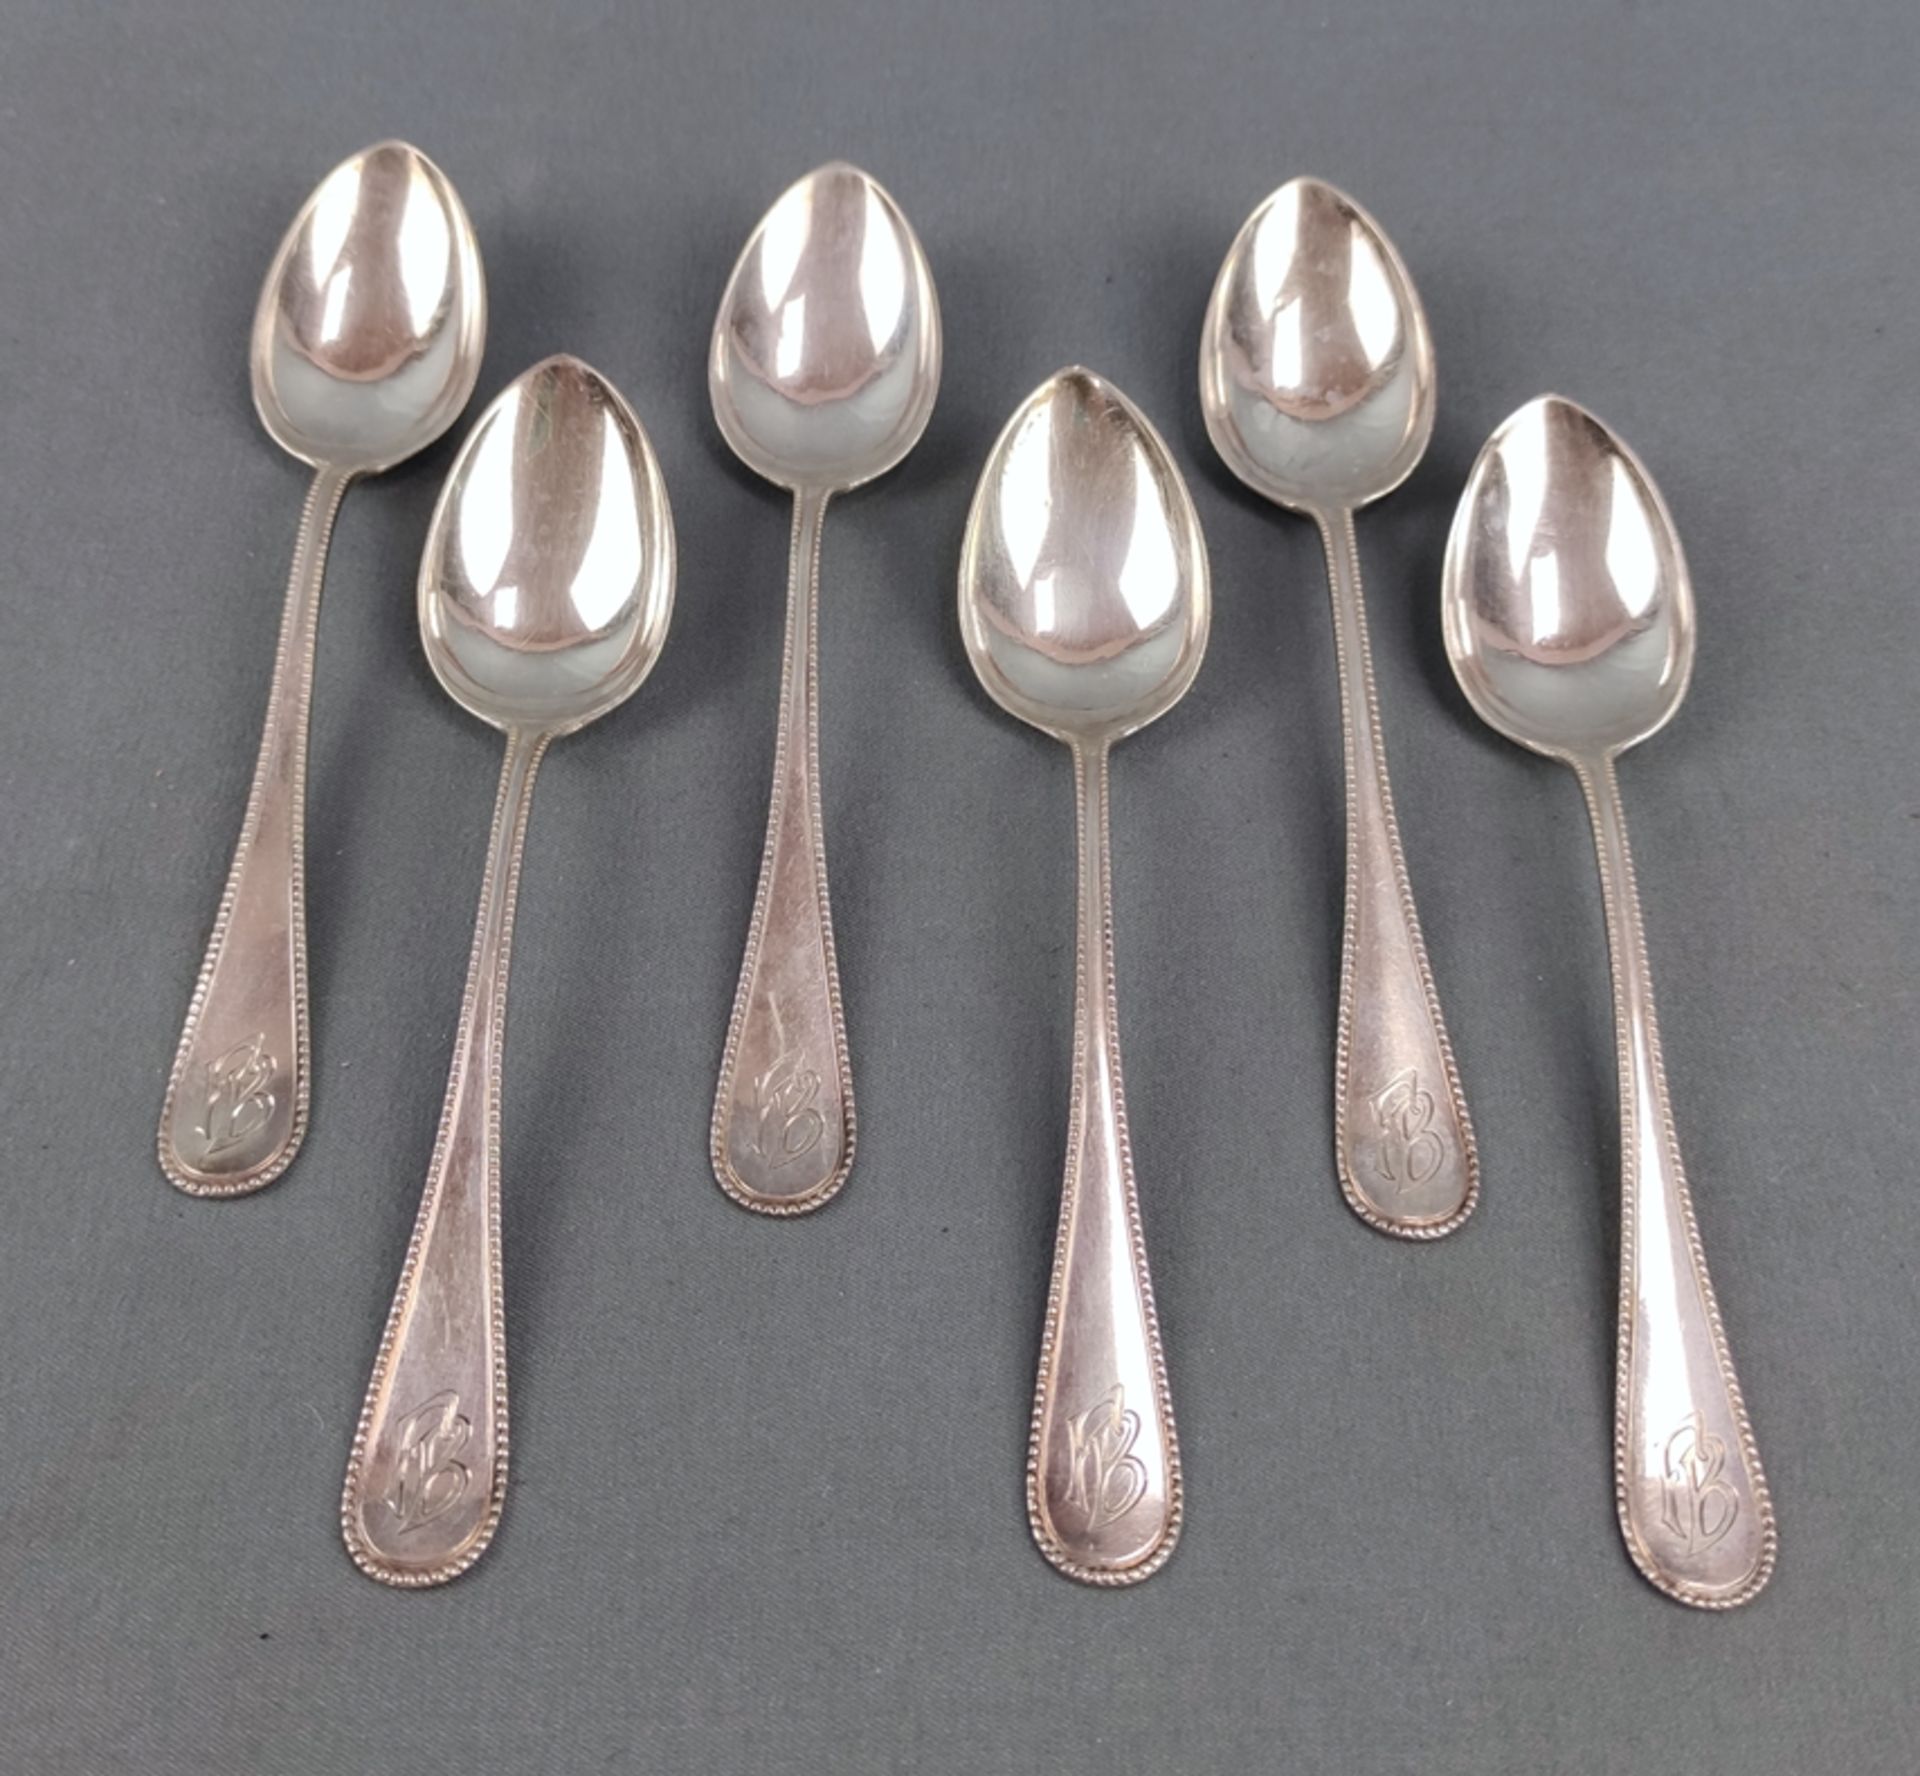 6 coffee spoons, monogrammed "FB", dated 1921, and inscribed "A. und W. Junge", silver 800, in case - Image 2 of 3